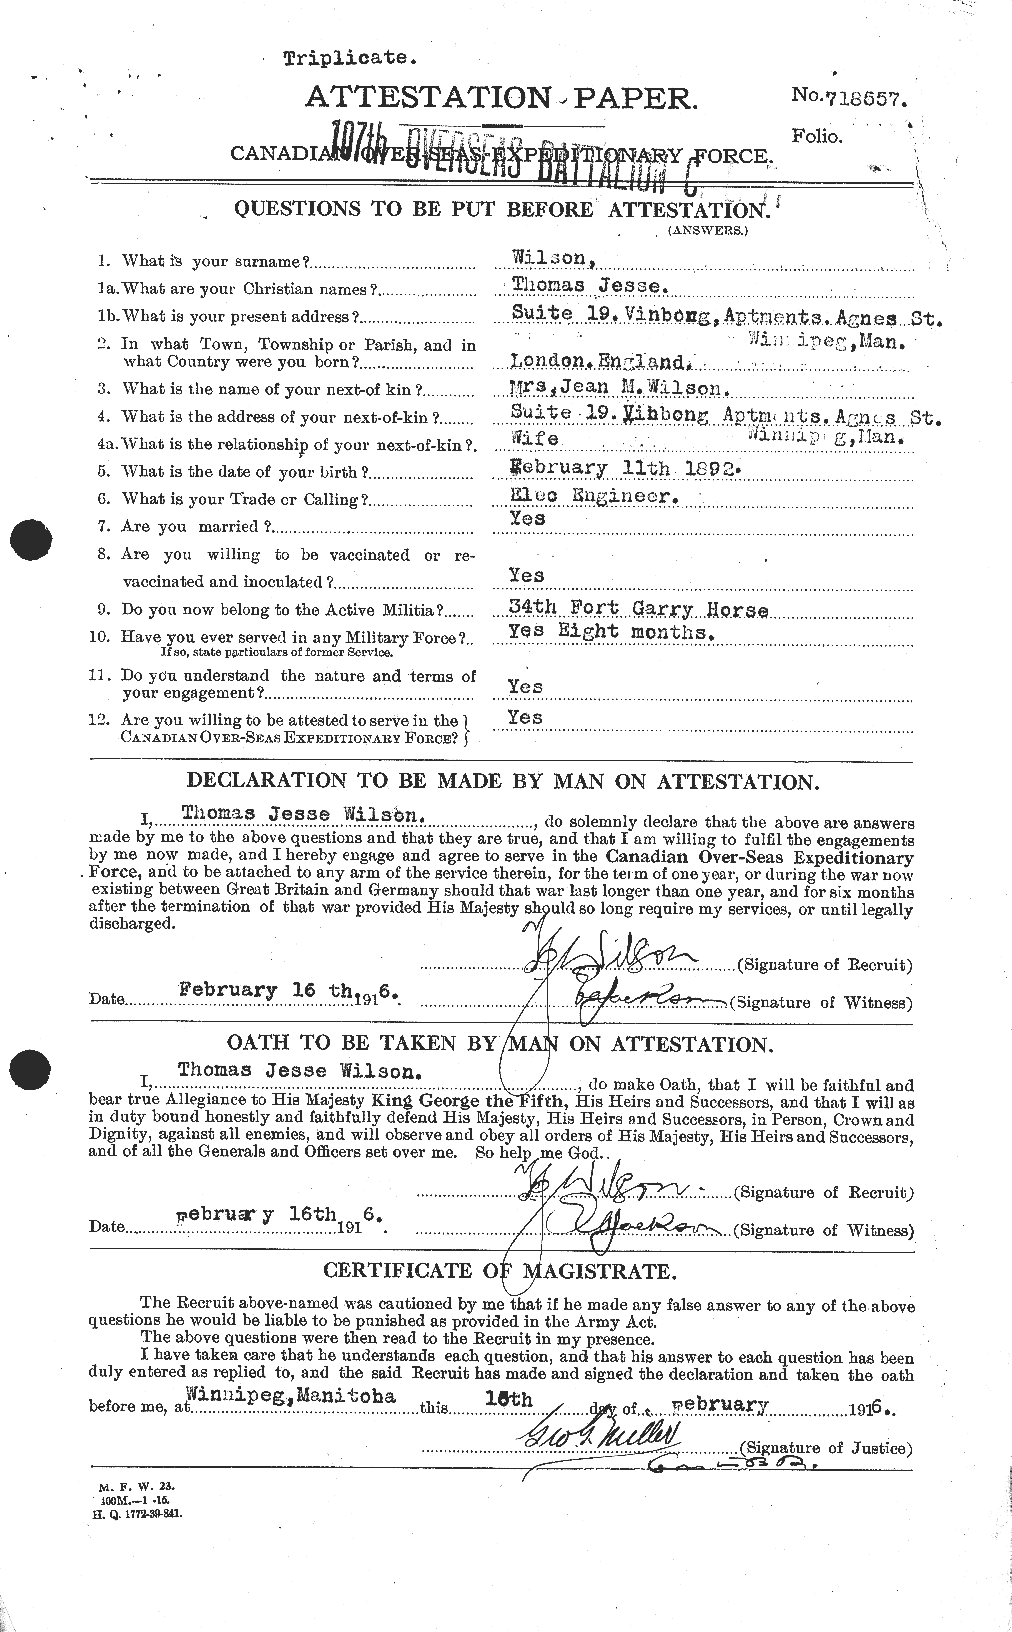 Personnel Records of the First World War - CEF 681279a